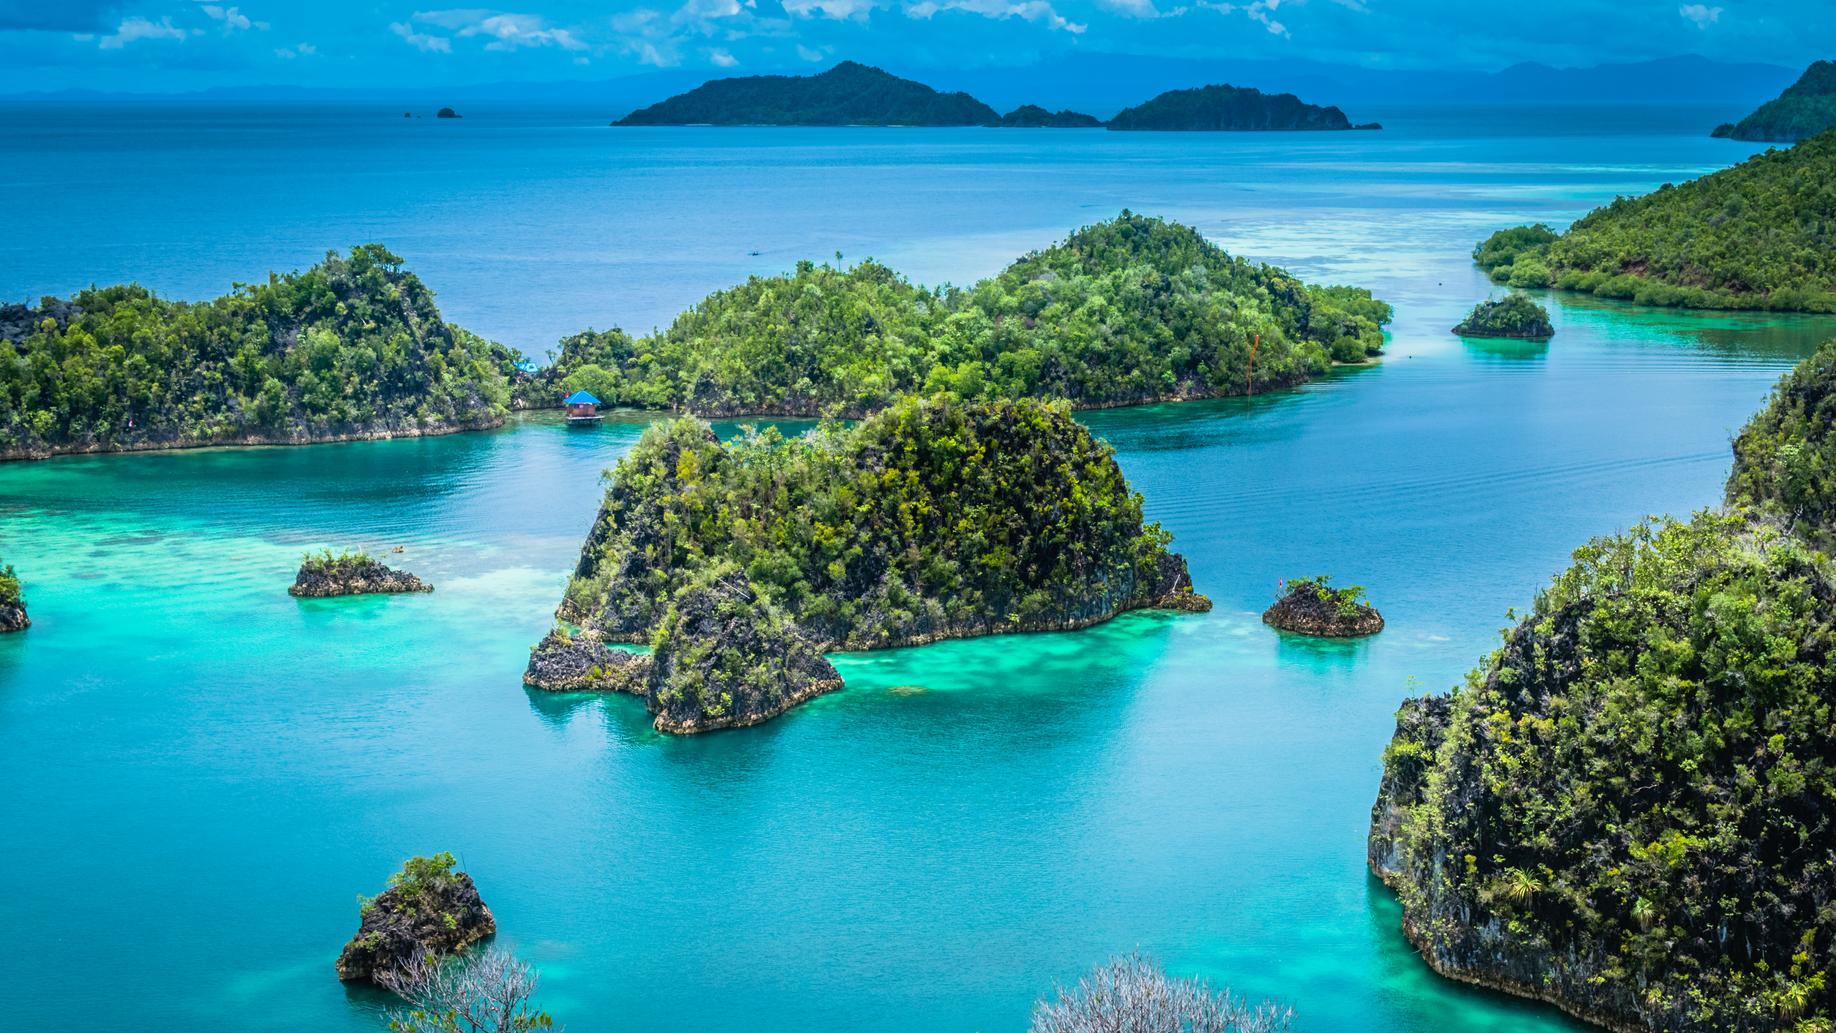 Raja Ampat, or Four Kings, is an island archipelago in New Guinea, Indonesia. 